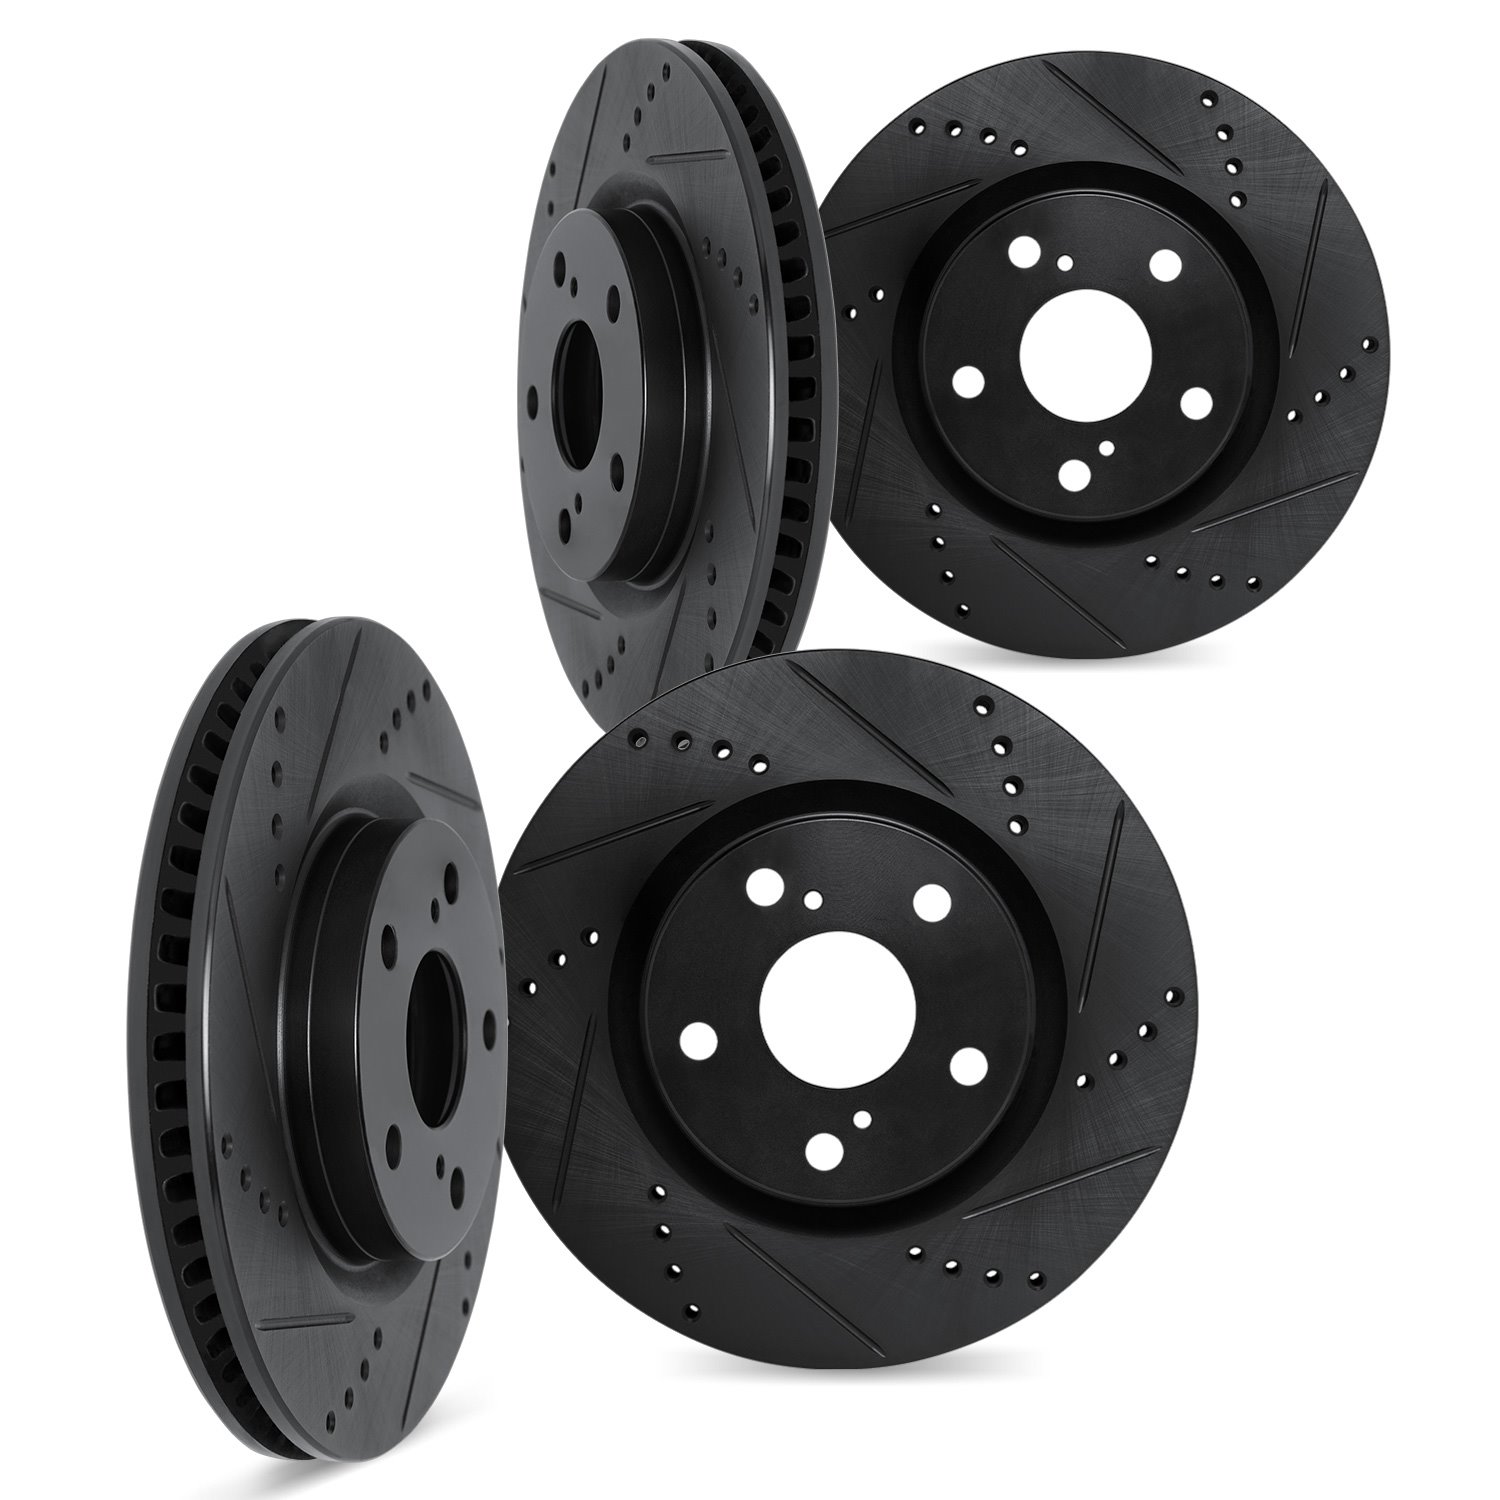 8004-73005 Drilled/Slotted Brake Rotors [Black], 1986-1991 Audi/Volkswagen, Position: Front and Rear